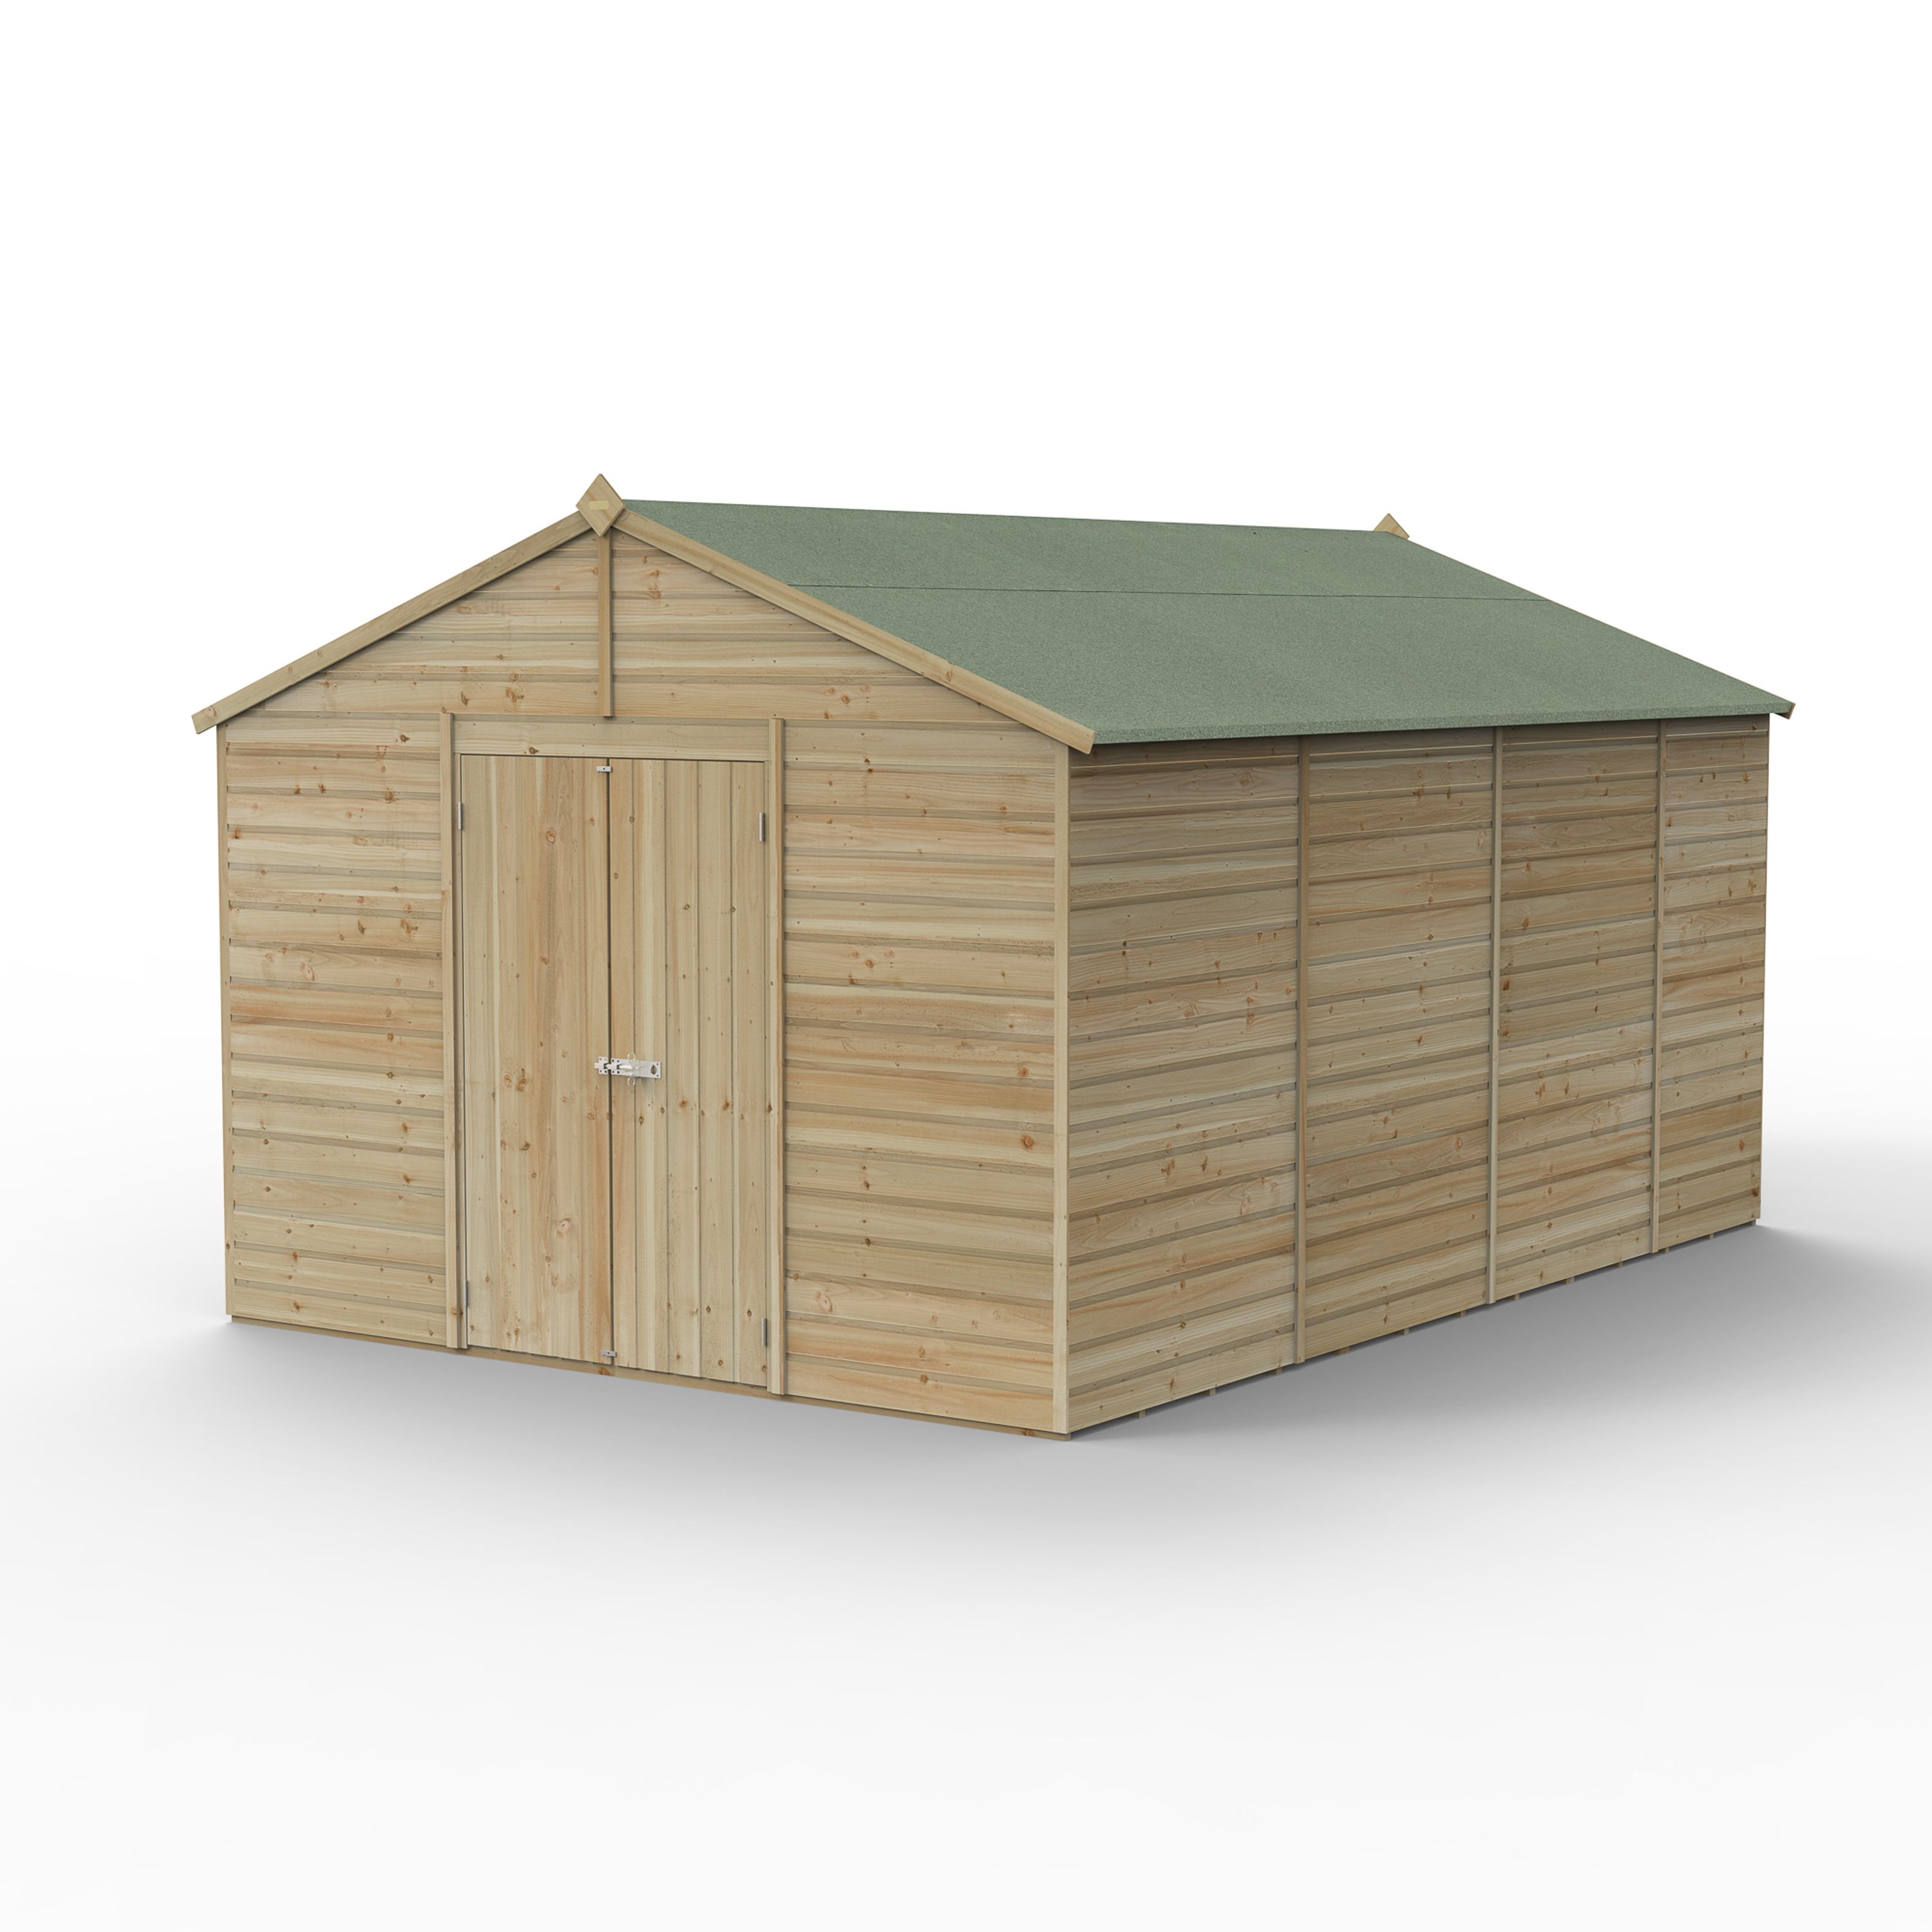 Forest Garden Beckwood 10x15 ft Apex Natural timber Wooden 2 door Shed with floor - Assembly not required